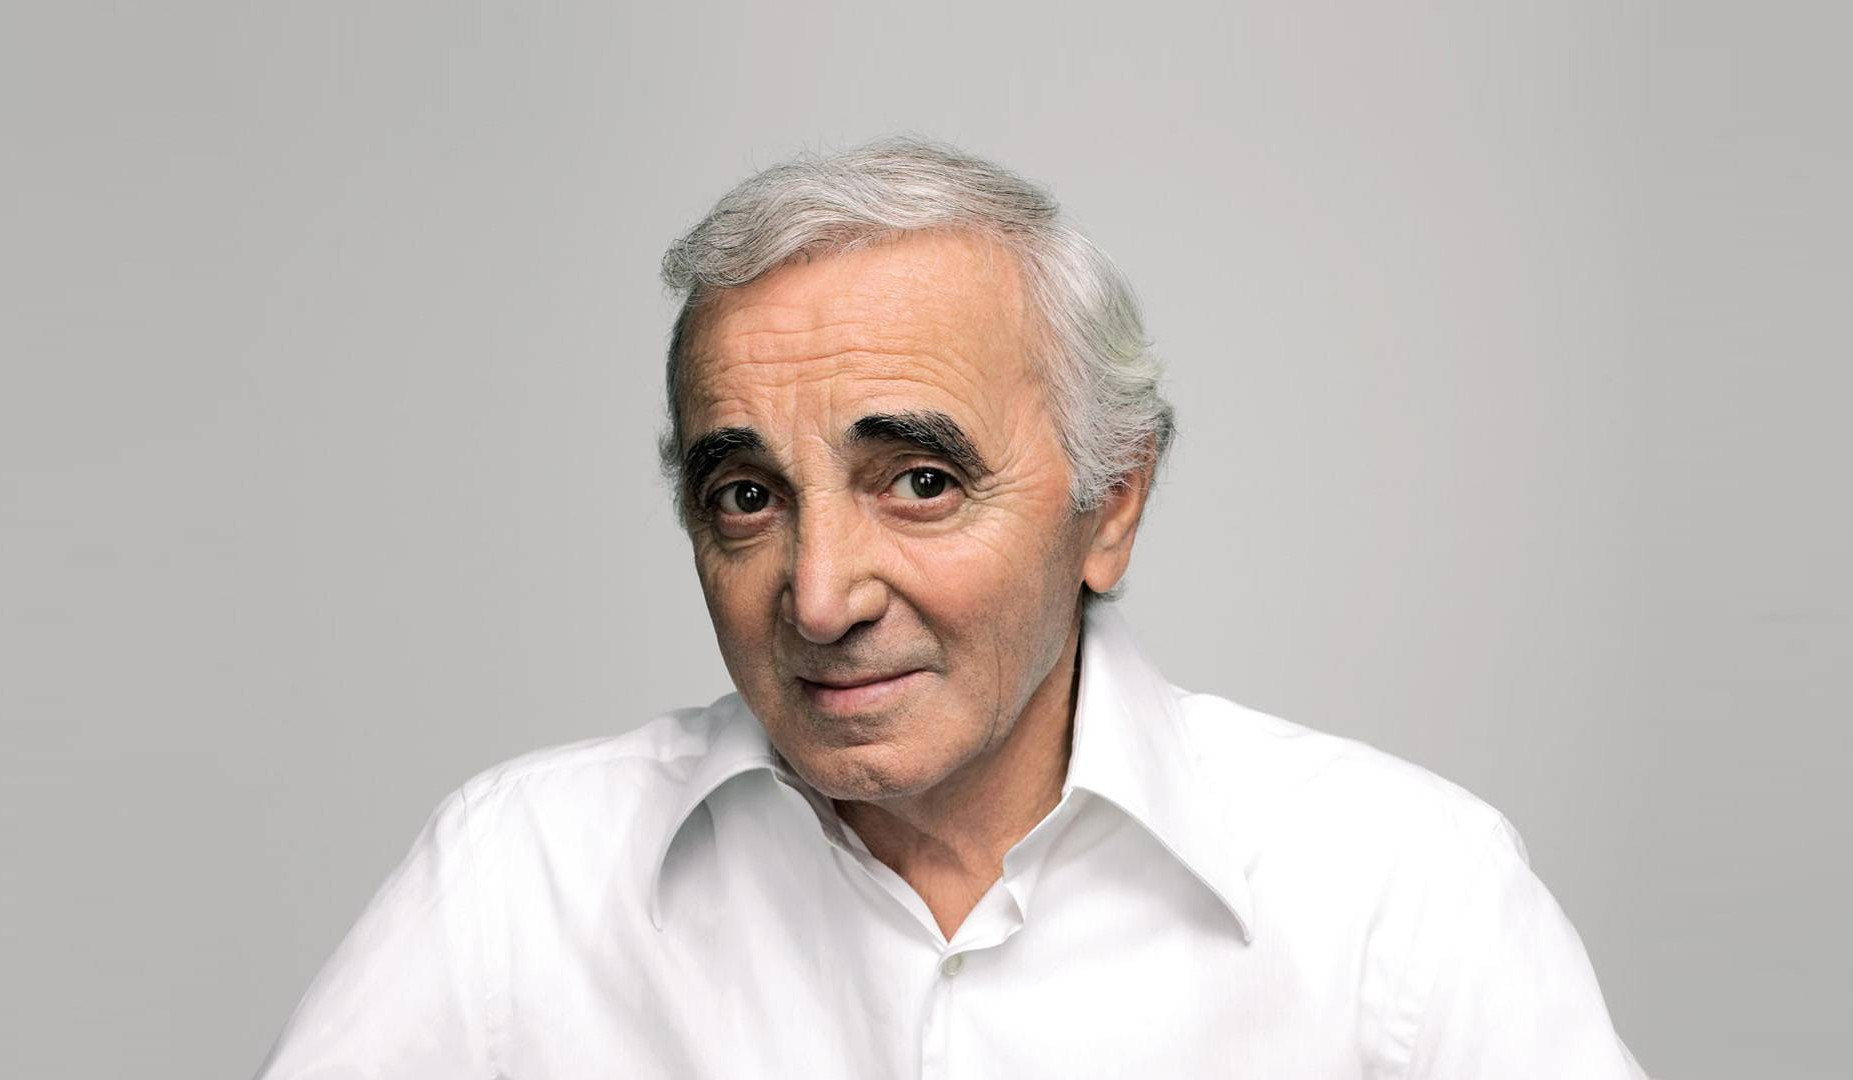 Statue of Aznavour will be installed in Yerevan: citizens can vote online for their preferred option